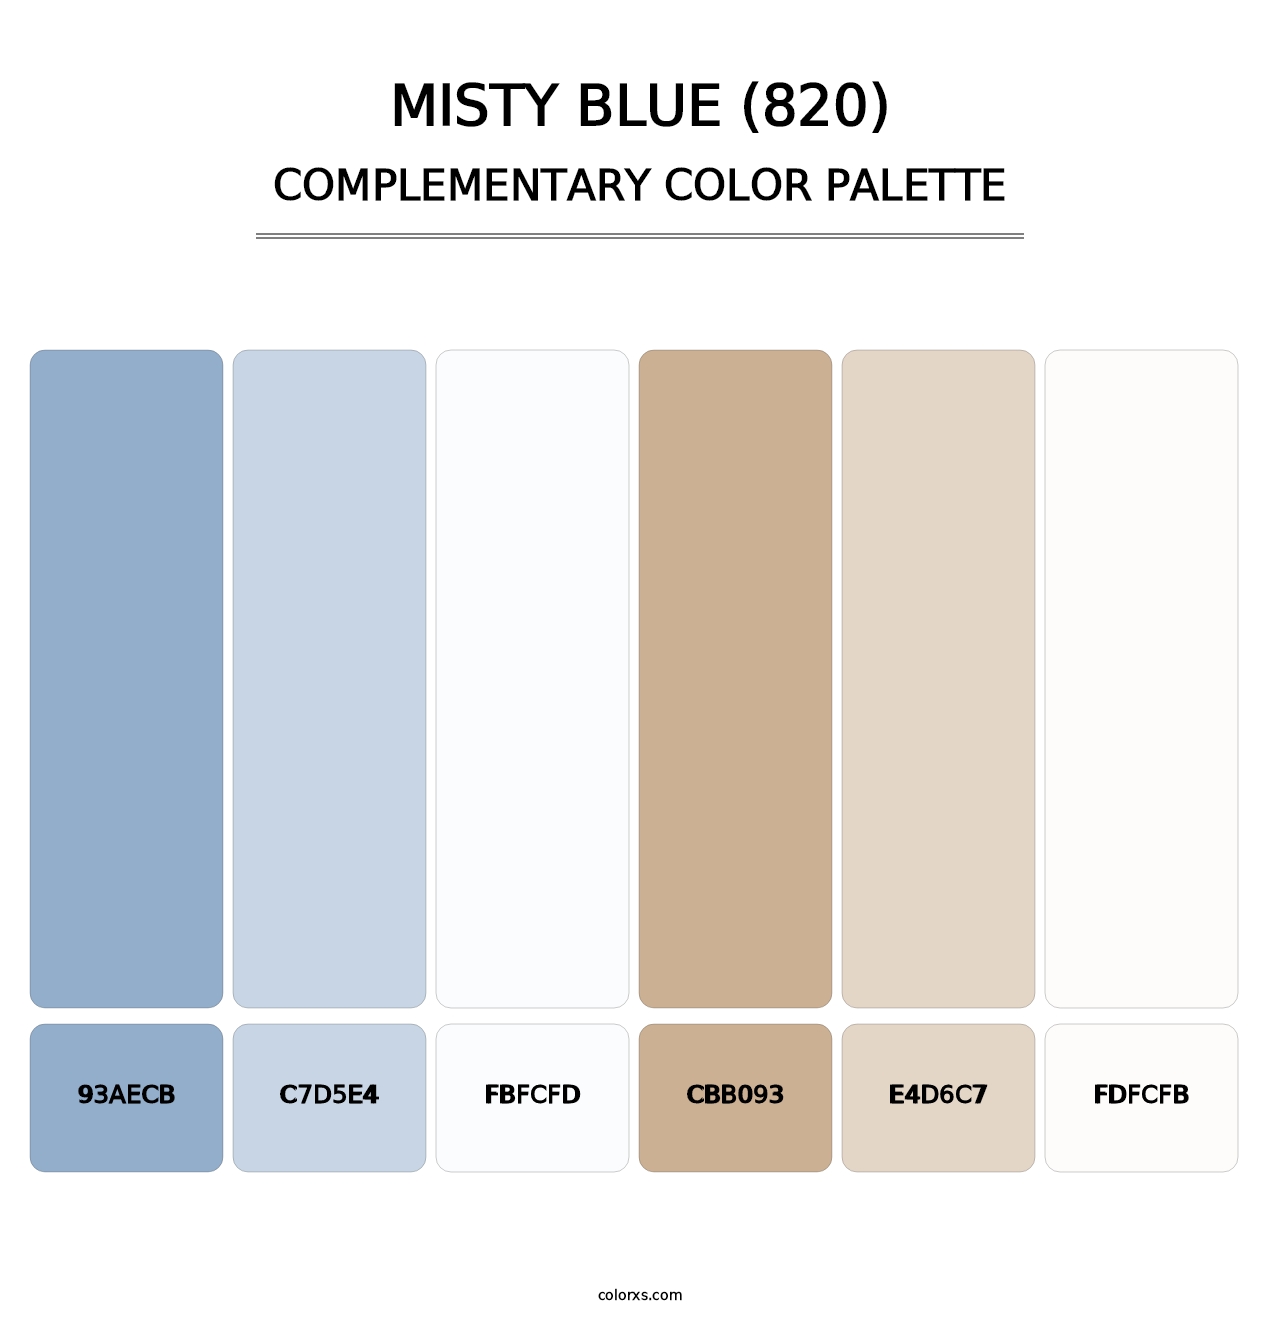 Misty Blue (820) - Complementary Color Palette